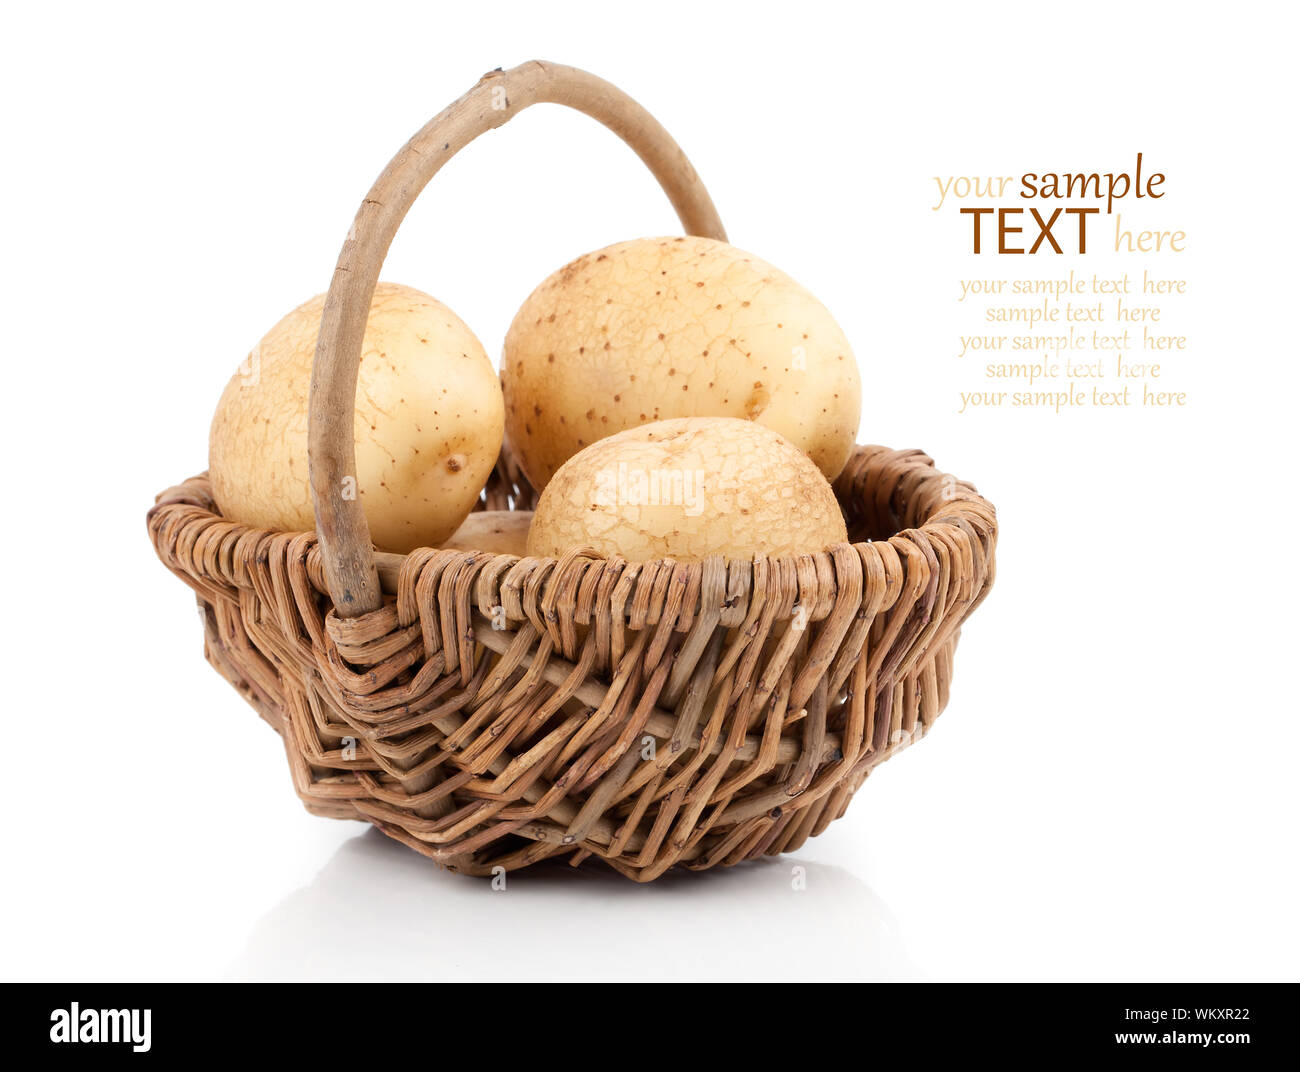 Golden Potatoes in wicker basket over white background Stock Photo